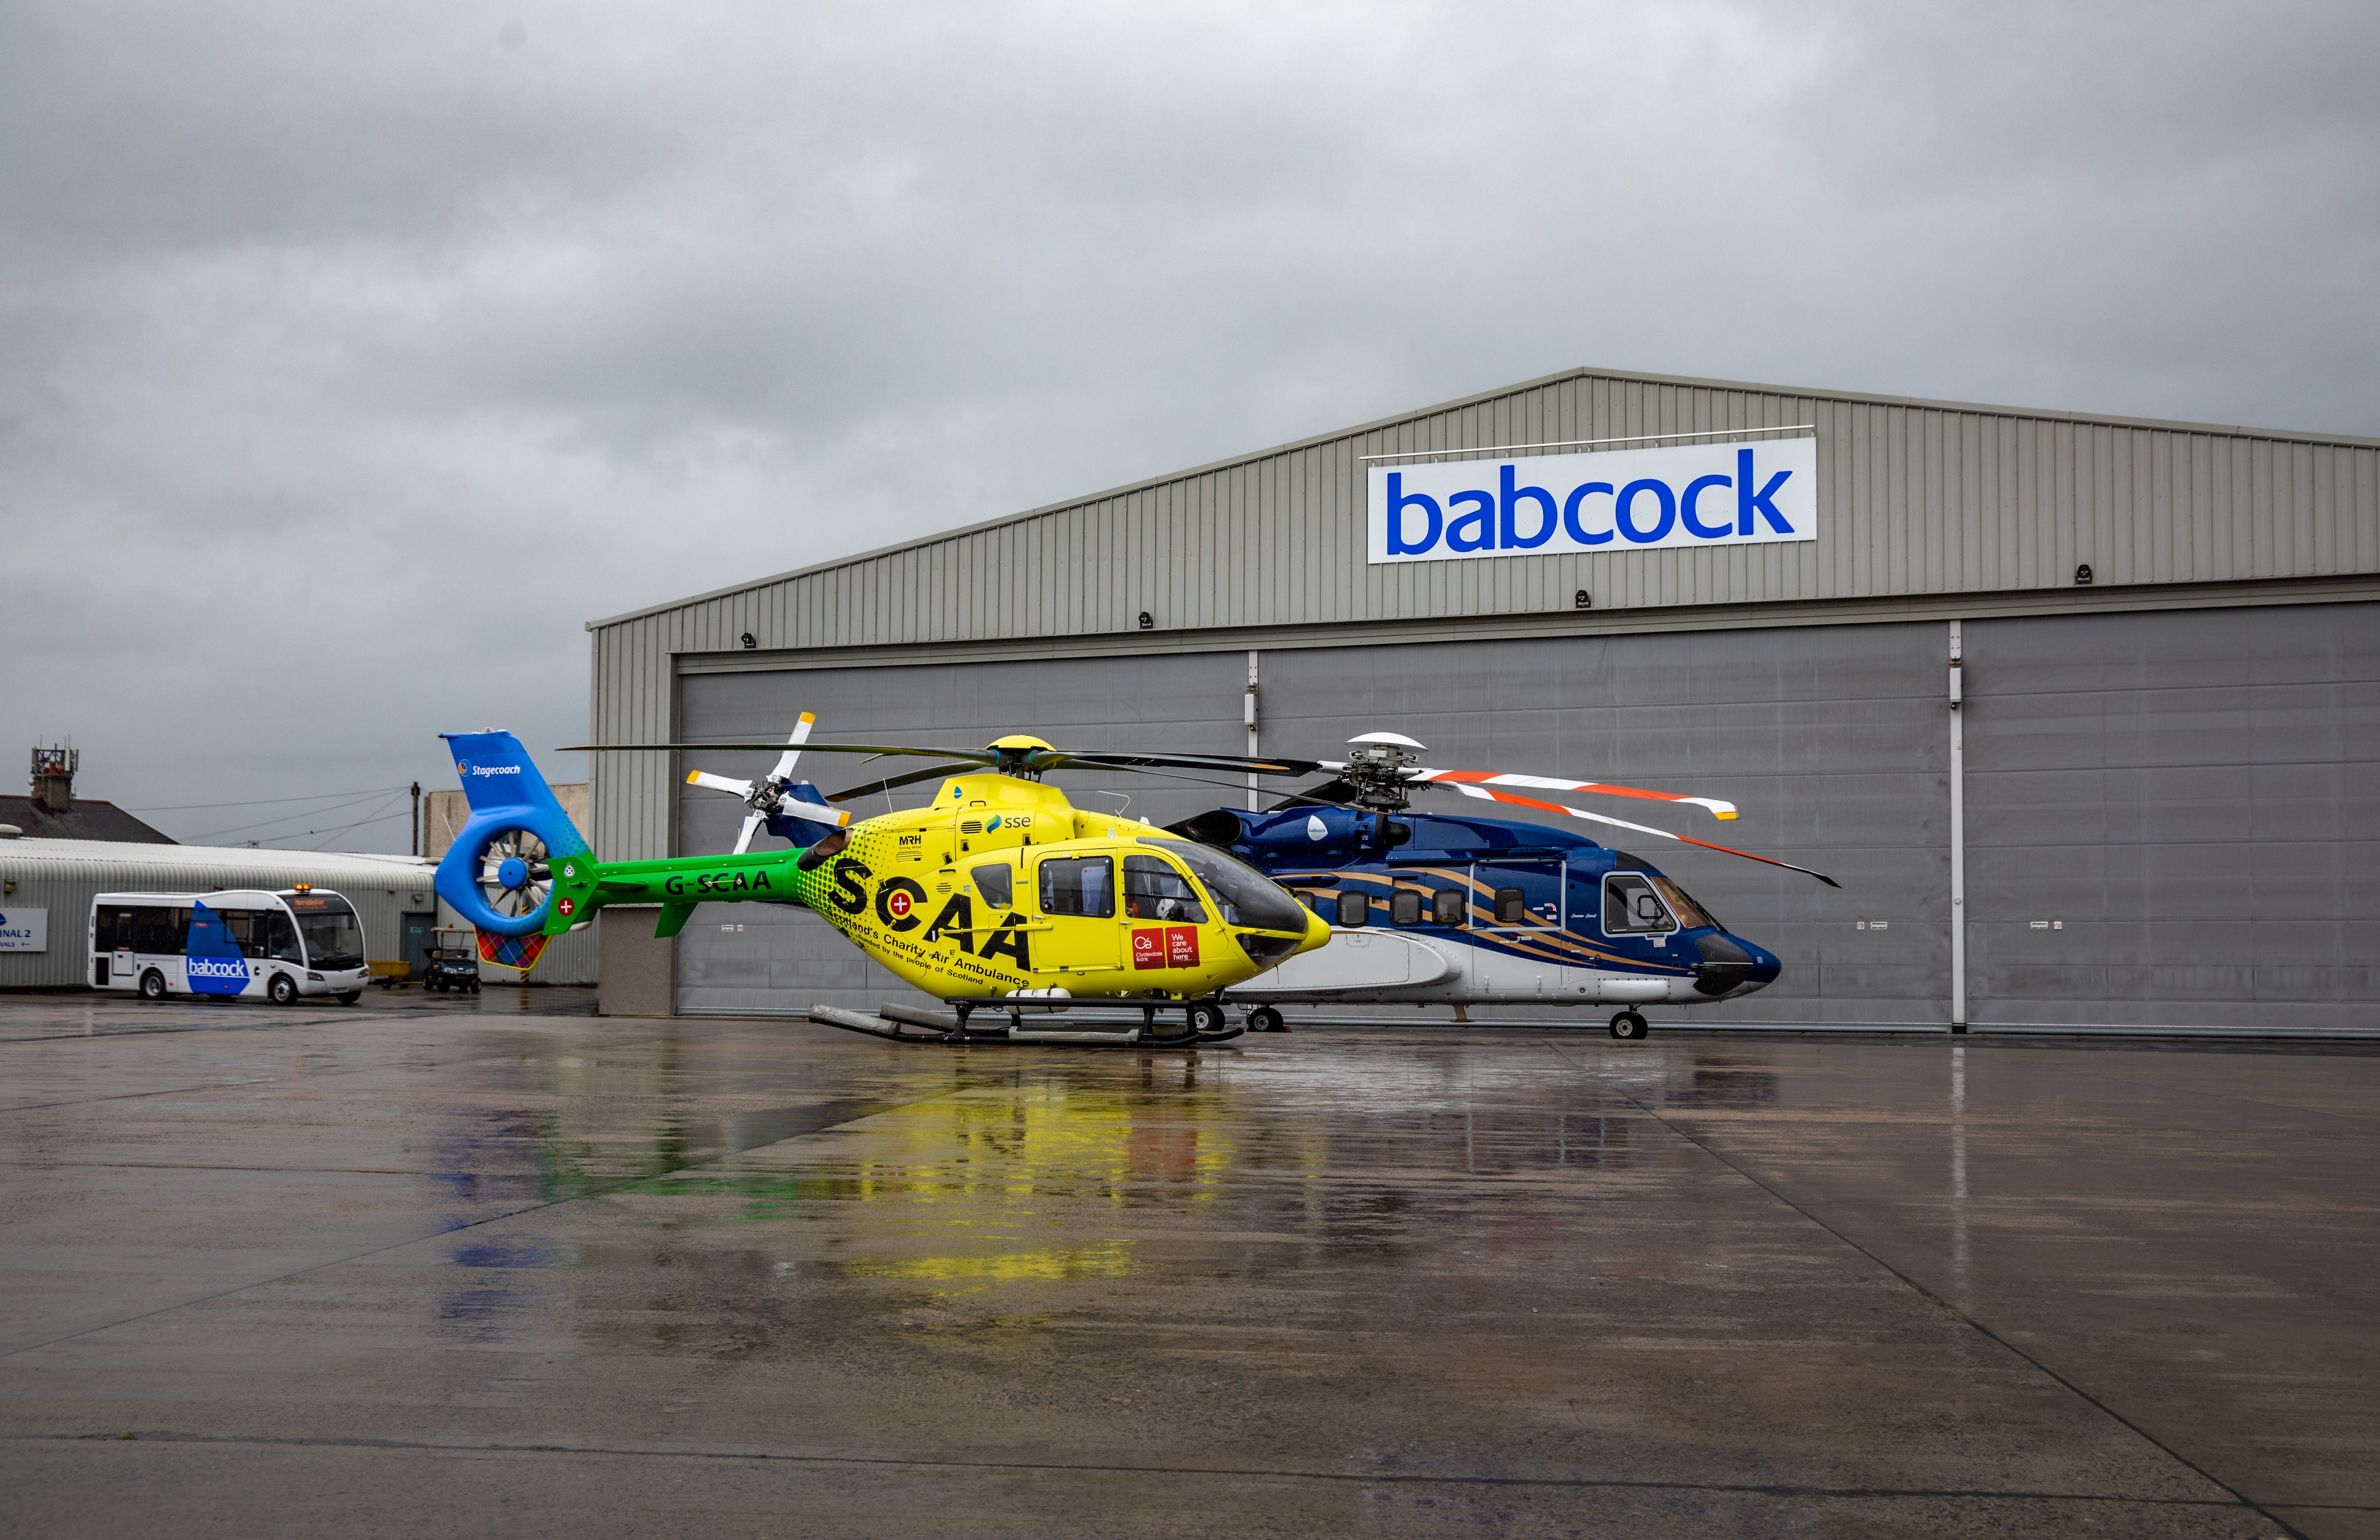 Scotland's Charity Air Ambulance (SCAA) has agreed a contract with Babcock to launch a new air ambulance service from Aberdeen International Airport.